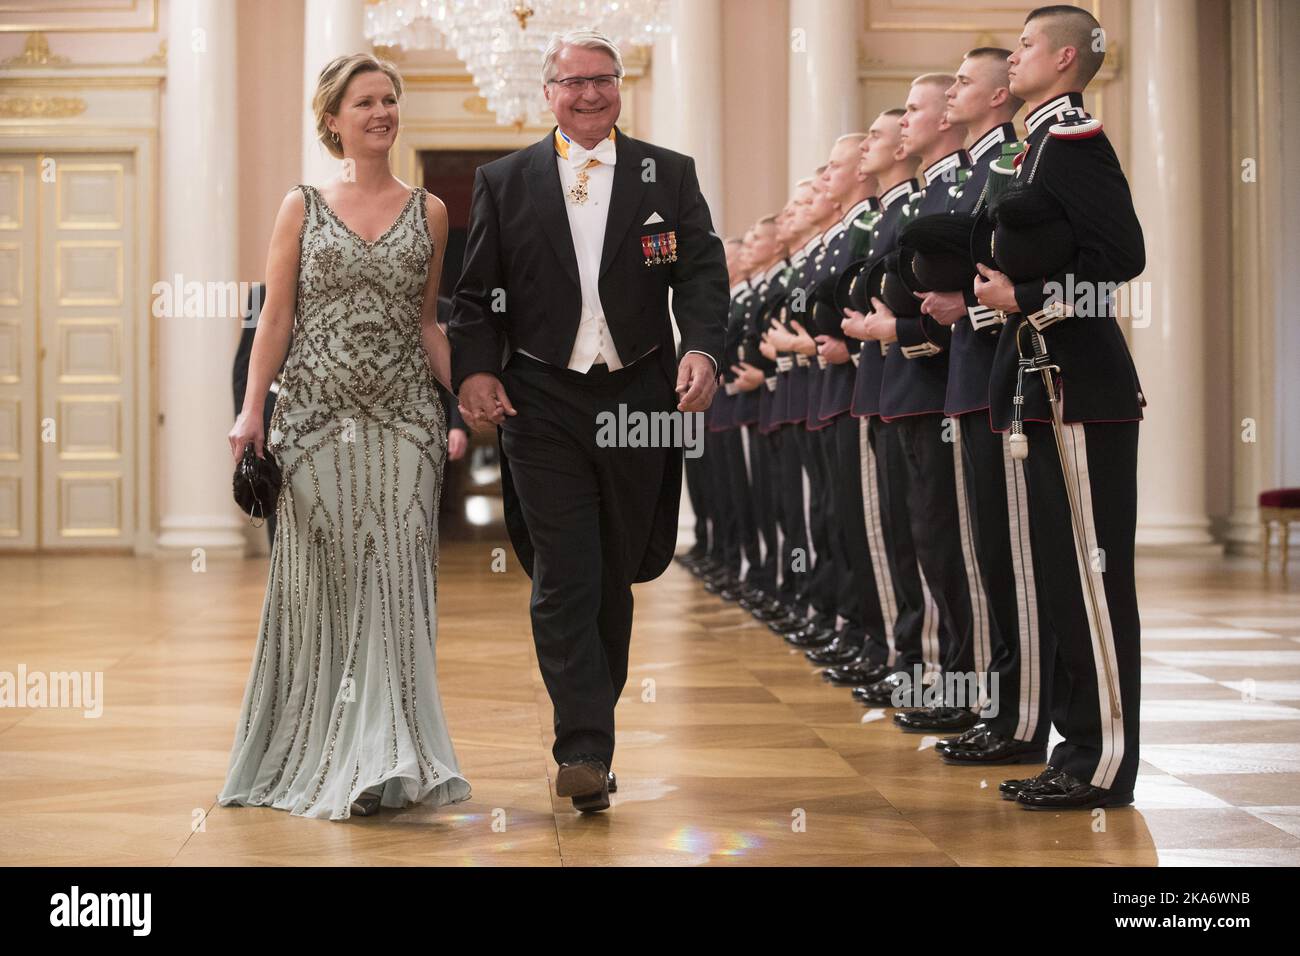 Oslo, Norway 20170509. Gala dinner at the Palace in connection with the 80th anniversary of King Harald of Norway and Queen Sonja of Norway. Fabian Stang and Catharina Munthe on their way to gala dinnerg. POOL. Photo: Haakon Mosvold Larsen / NTB scanpix Stock Photo